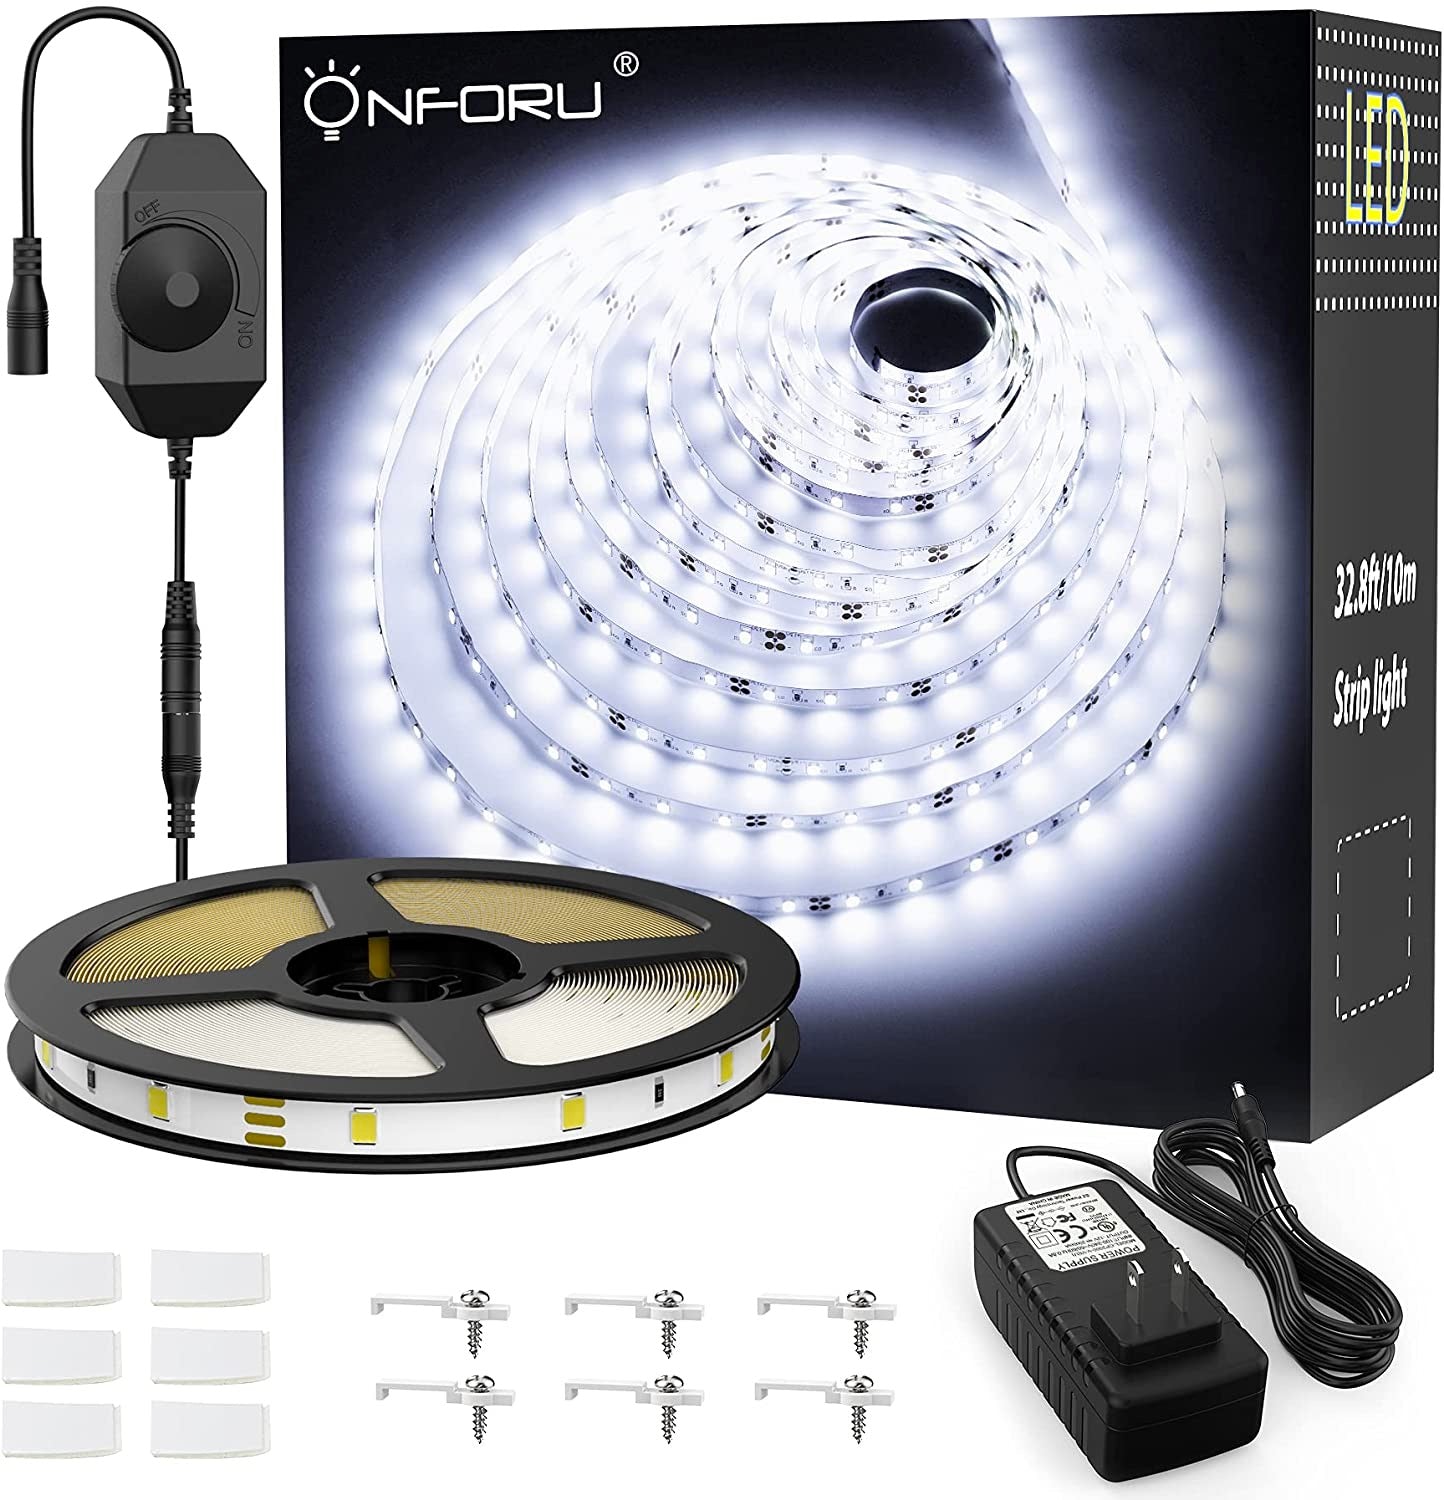 5000k LED strip lighting pictured with contents of the box